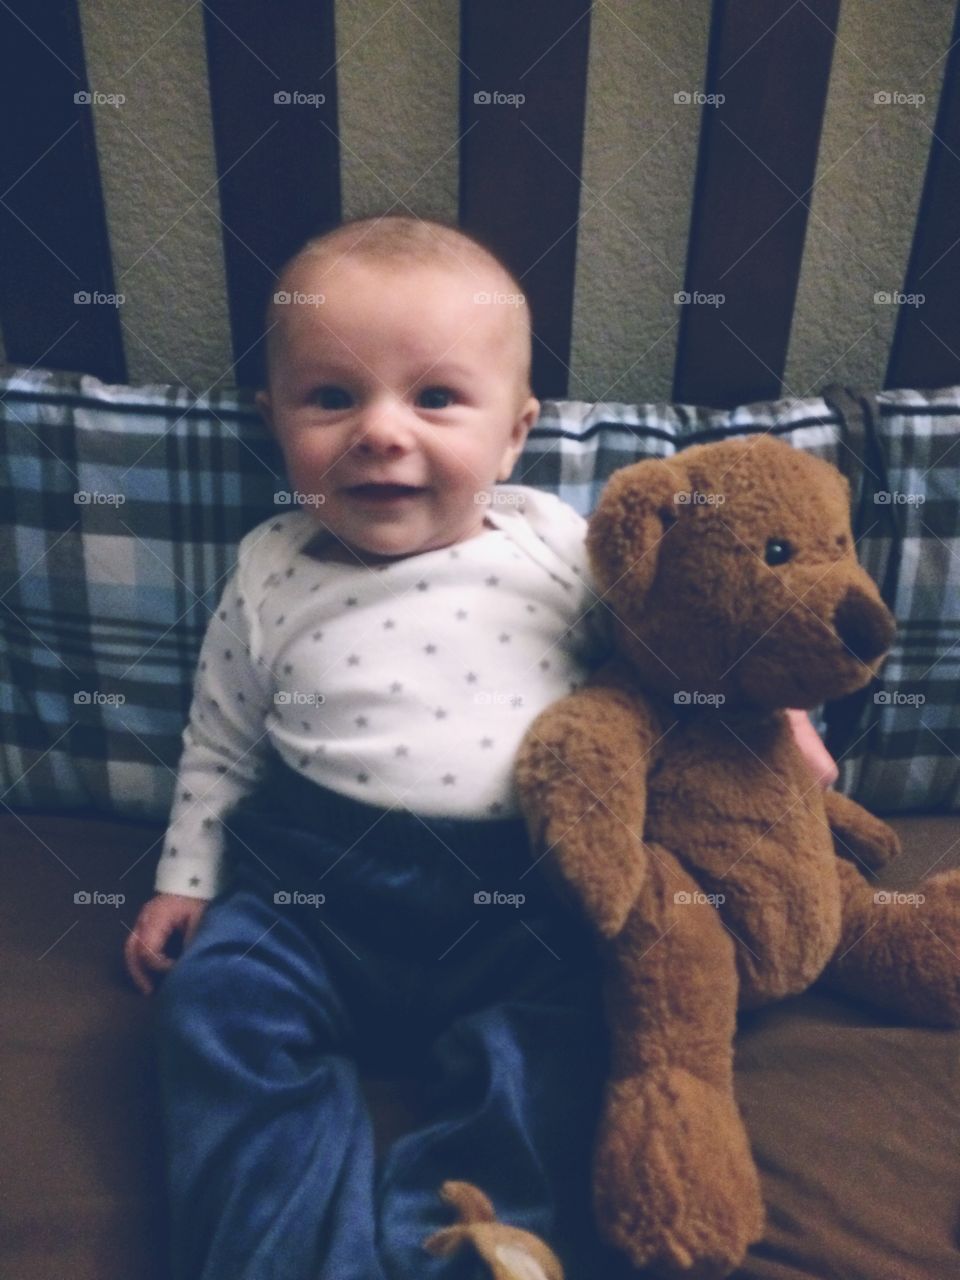 Baby and bear